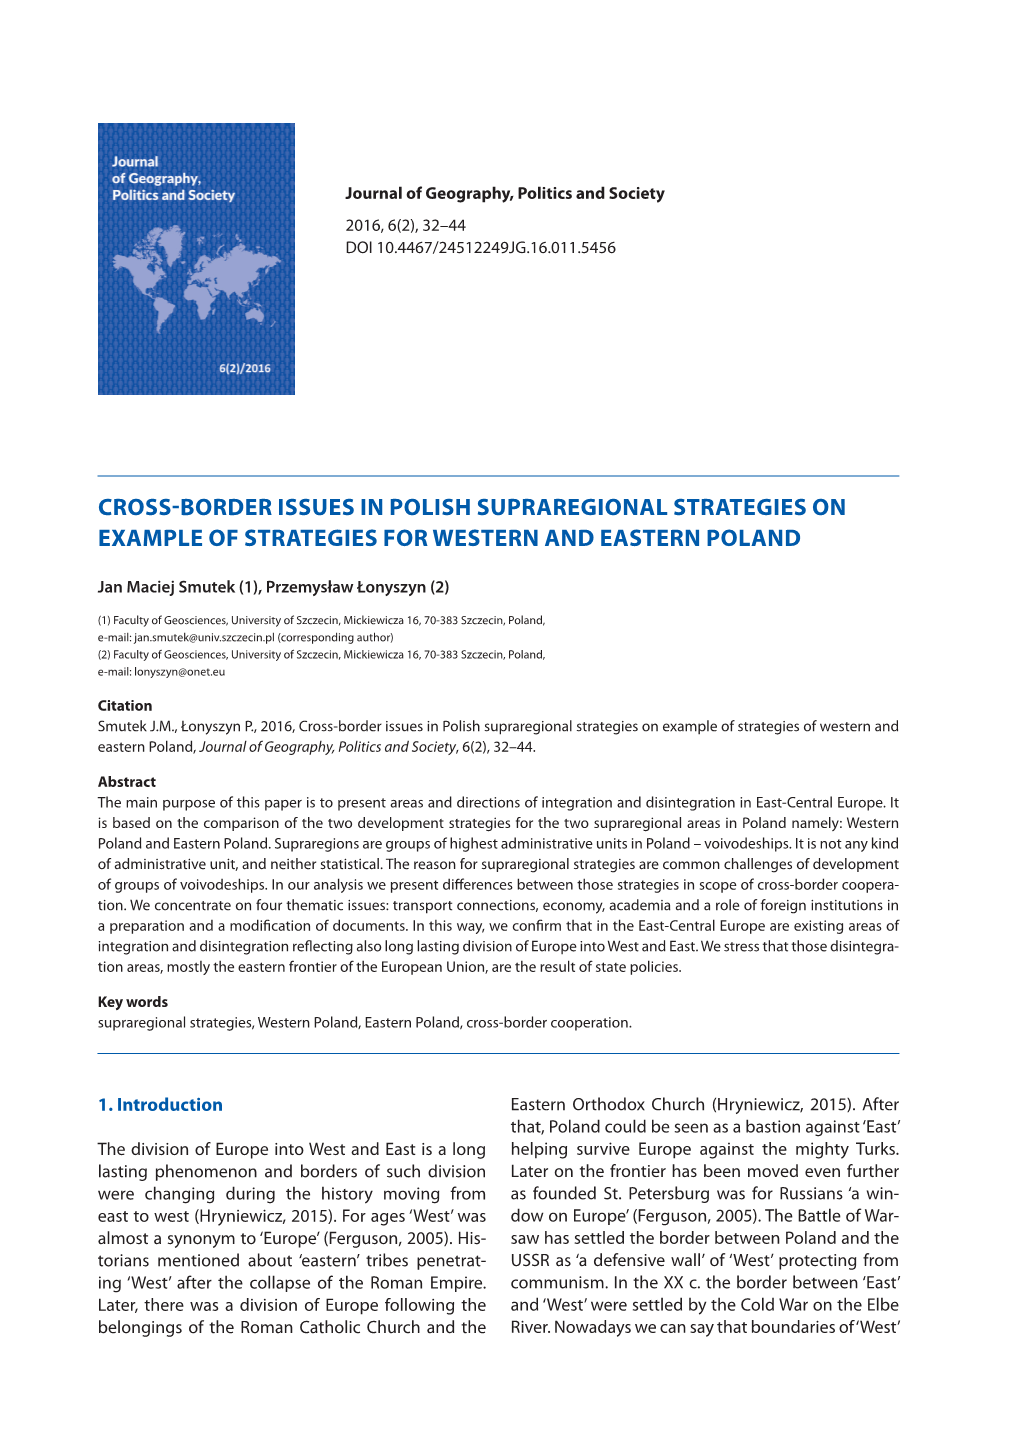 Cross-Border Issues in Polish Supraregional Strategies on Example of Strategies for Western and Eastern Poland